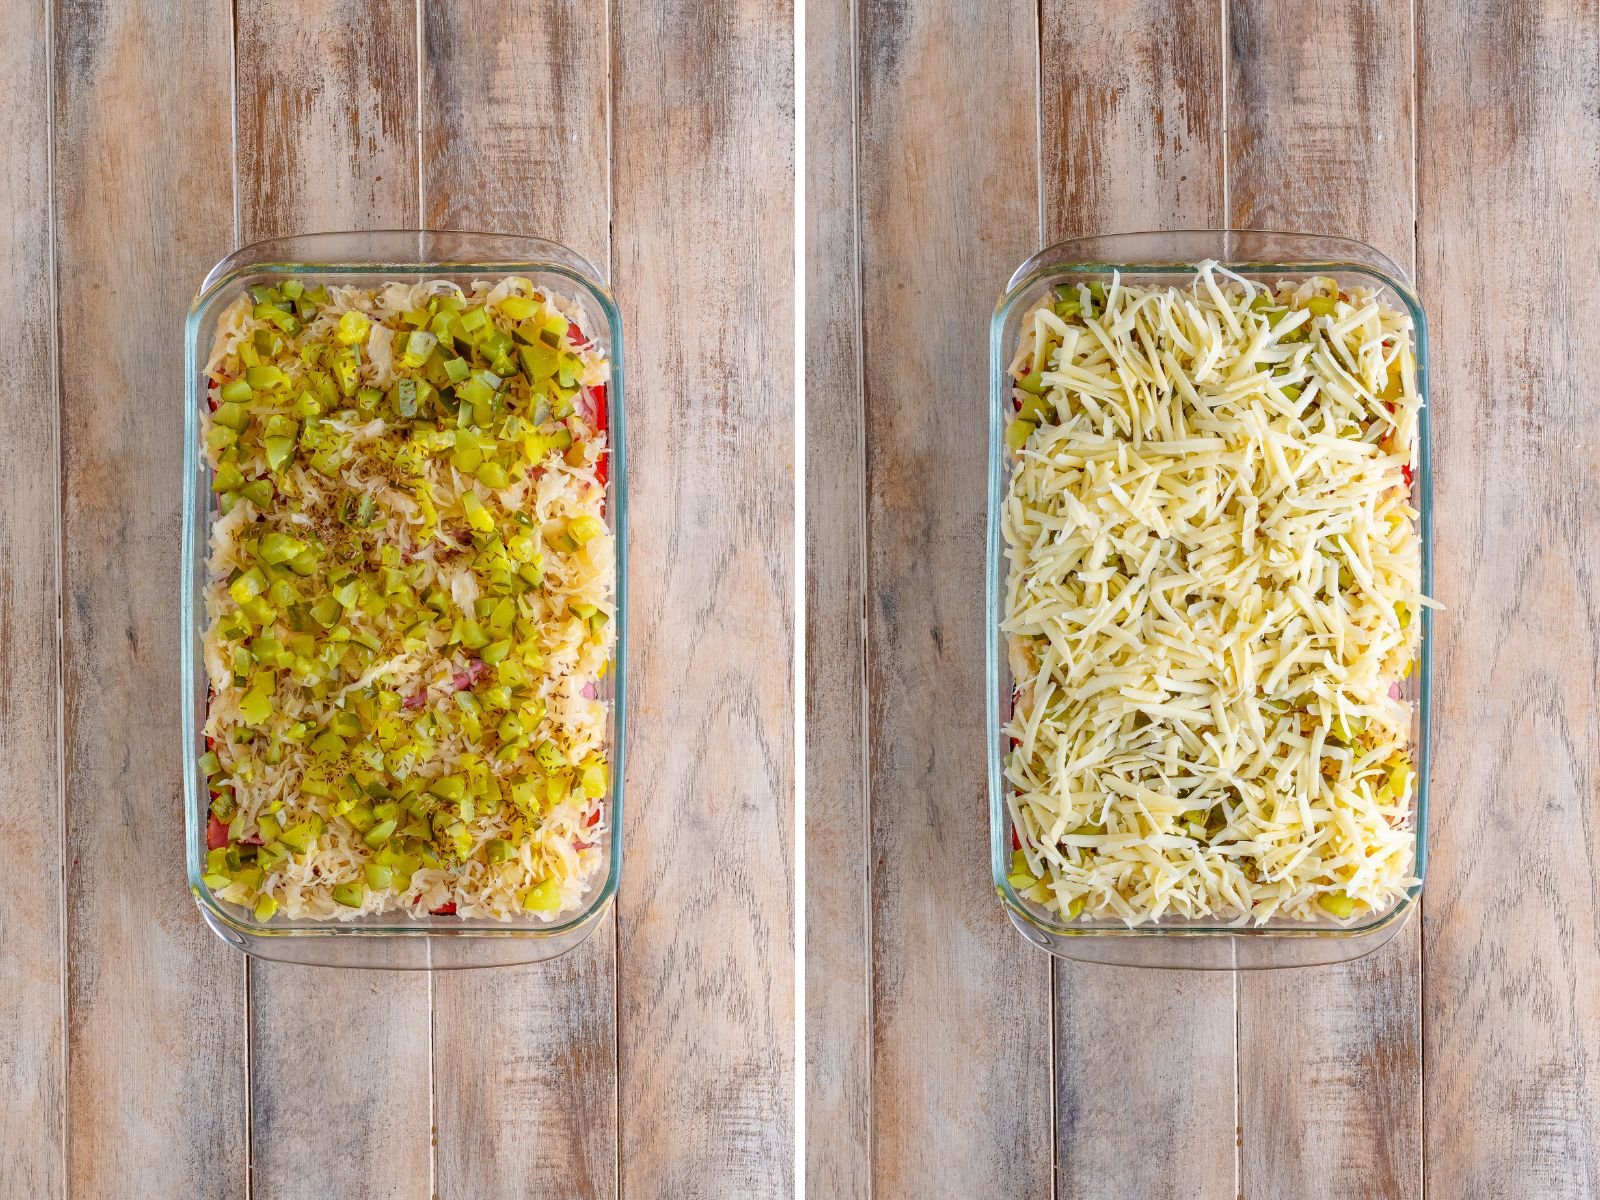 A casserole dish layered with cubed bread, meat, sauerkraut, chopped pickles, shredded cheese, and seeds.s.